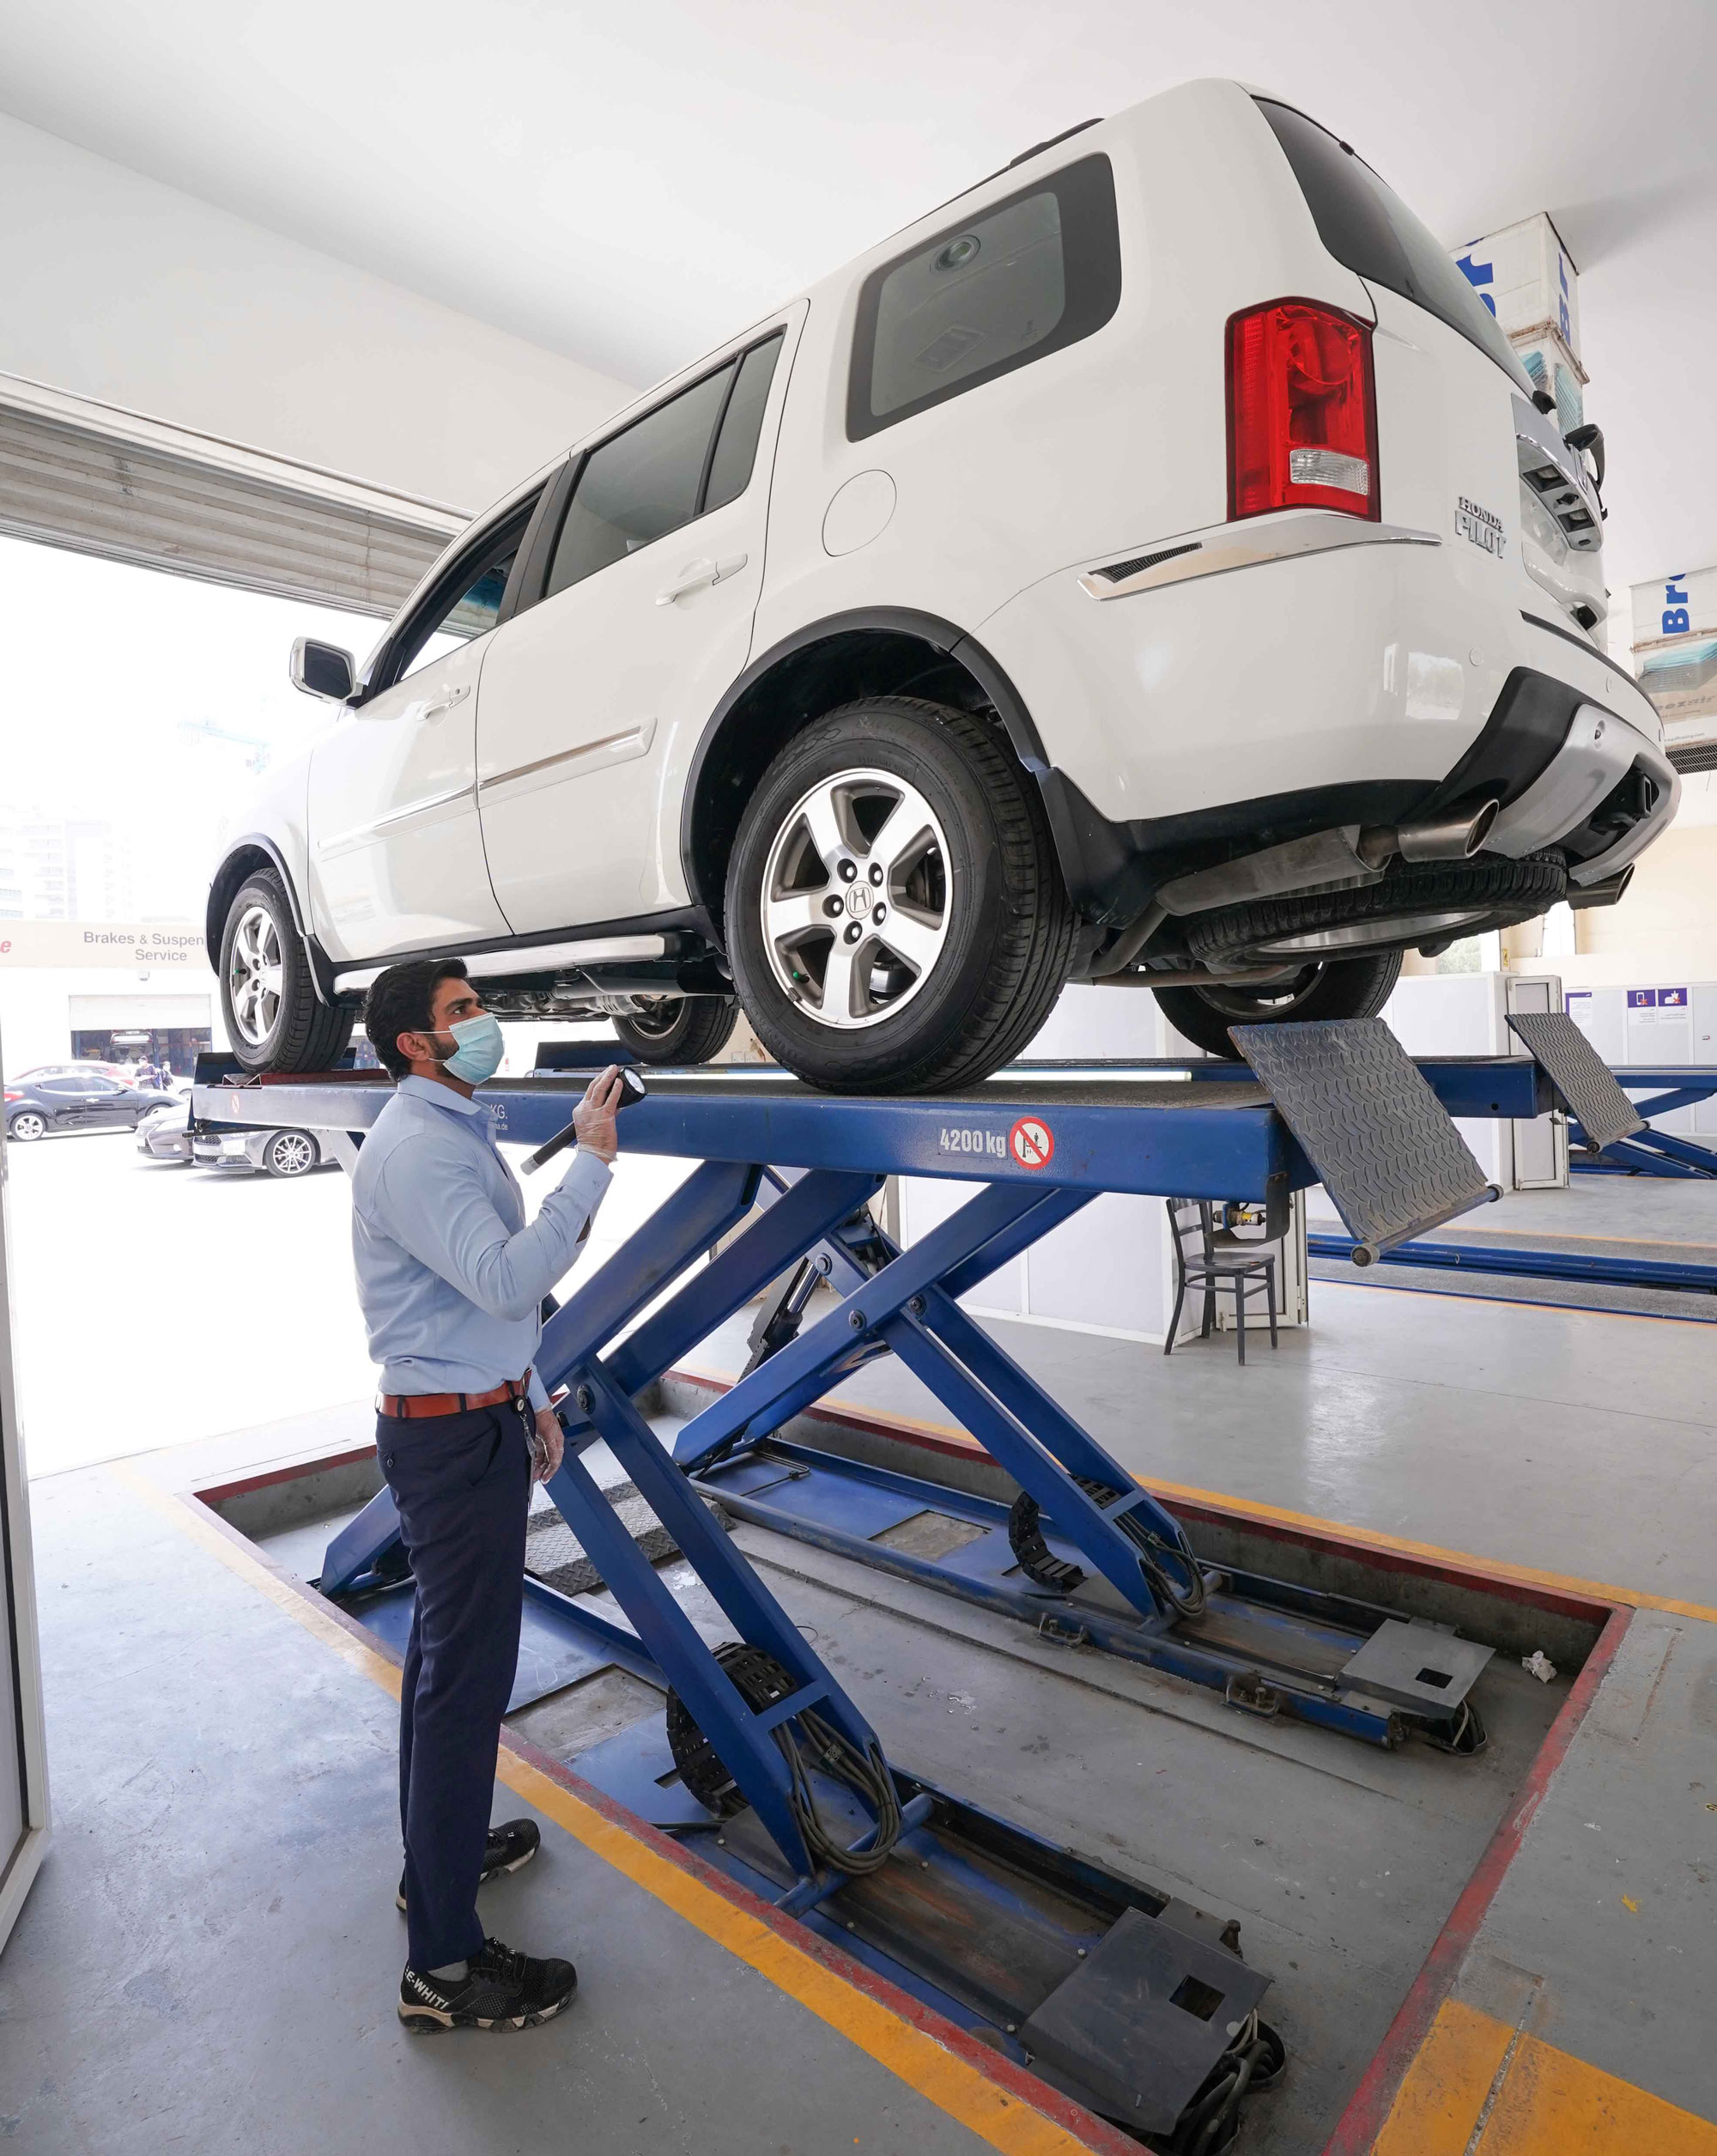 Dubai: RTA launches trial vehicle testing service throughout the week